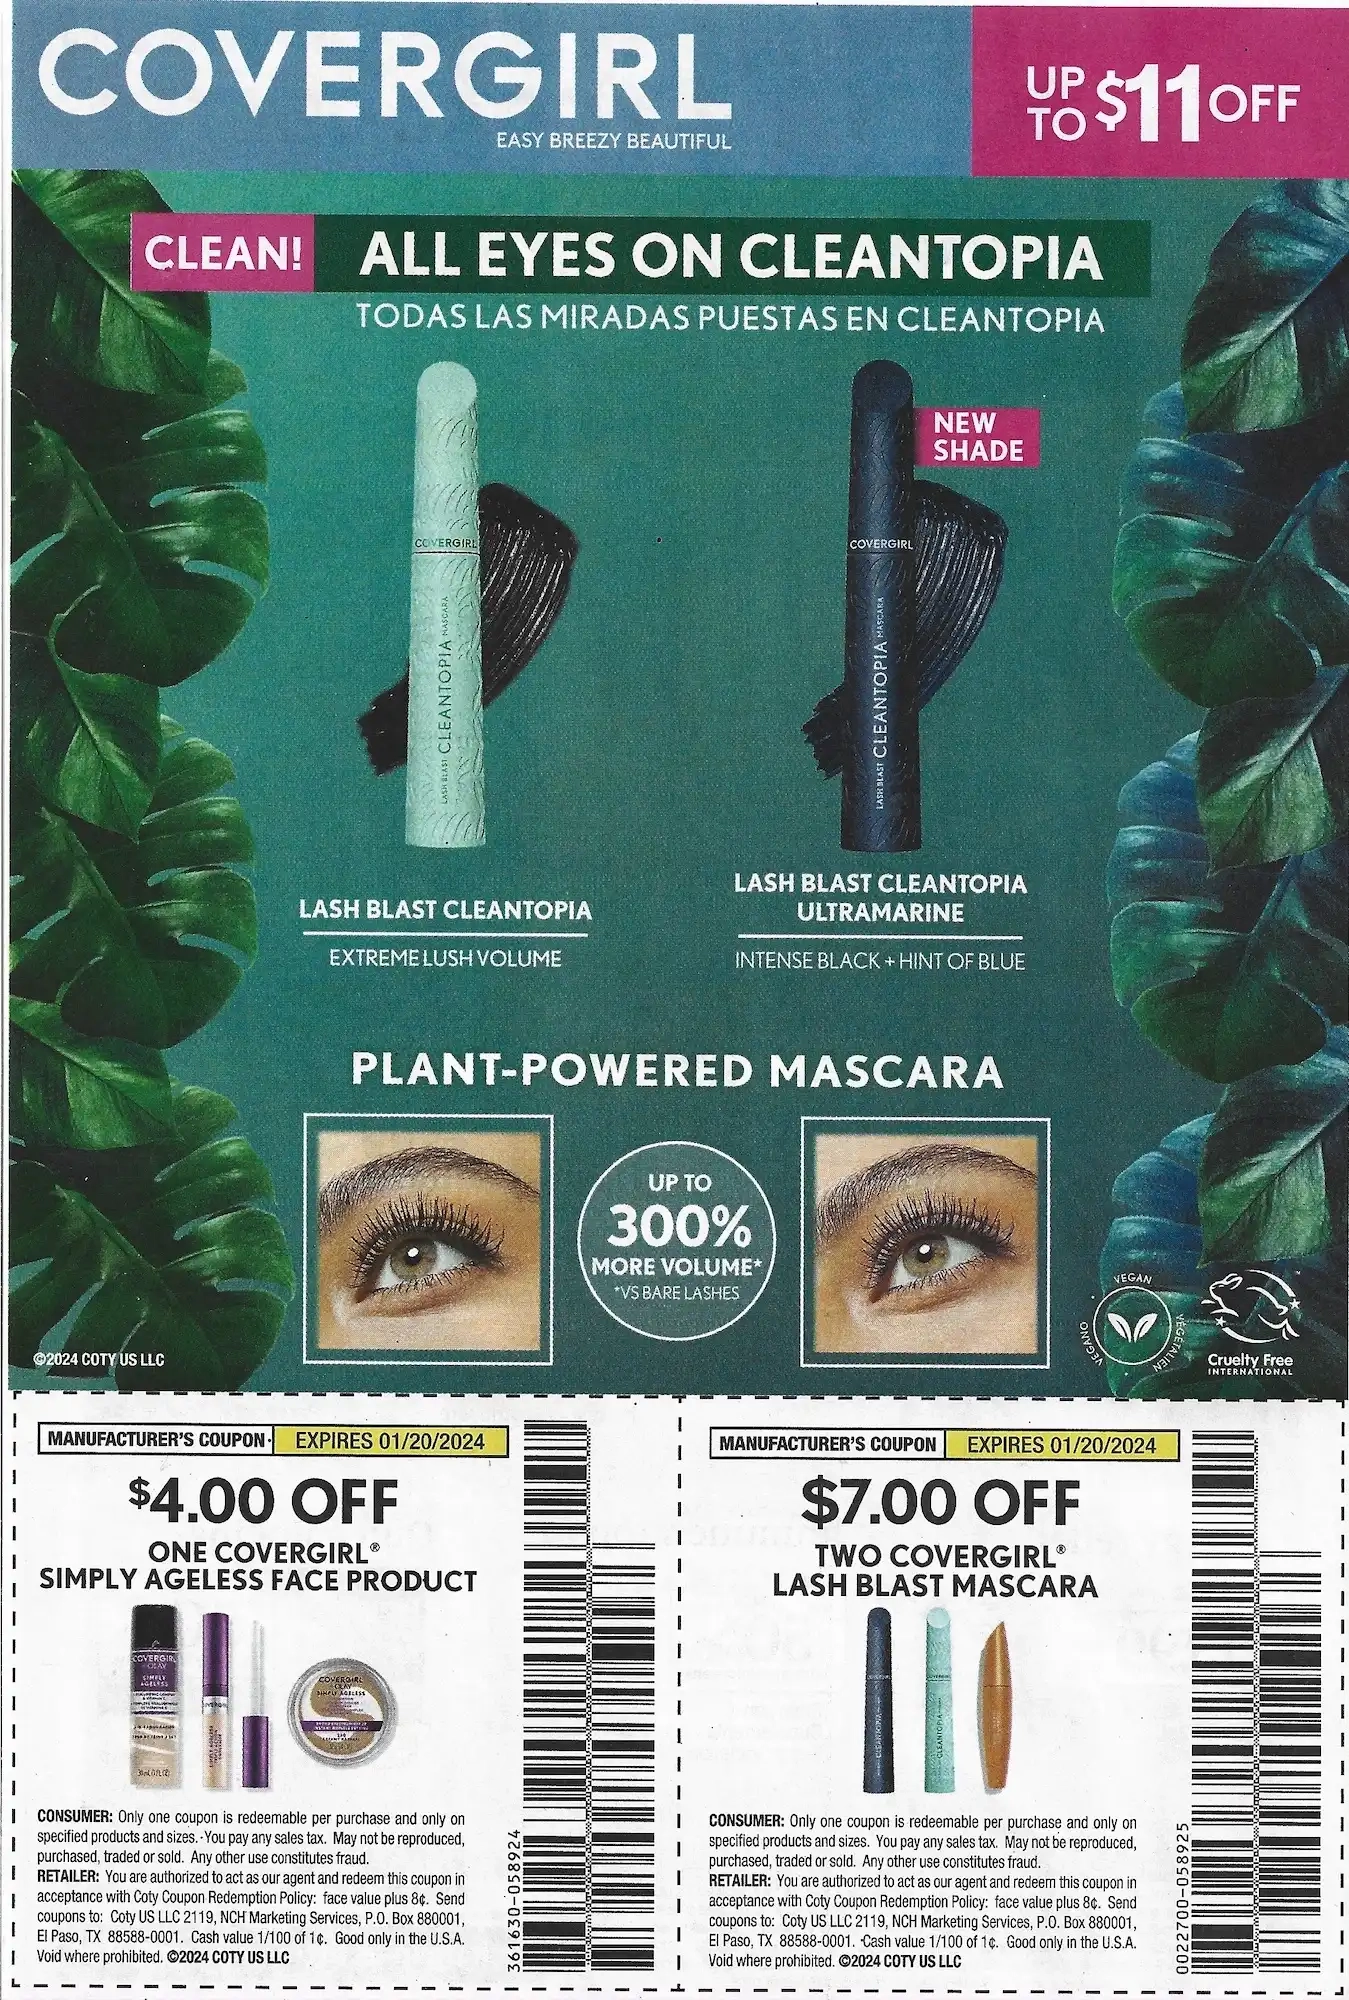 Save.Com Weekly Mailer Coupons - 01/07/2024 Covergirl